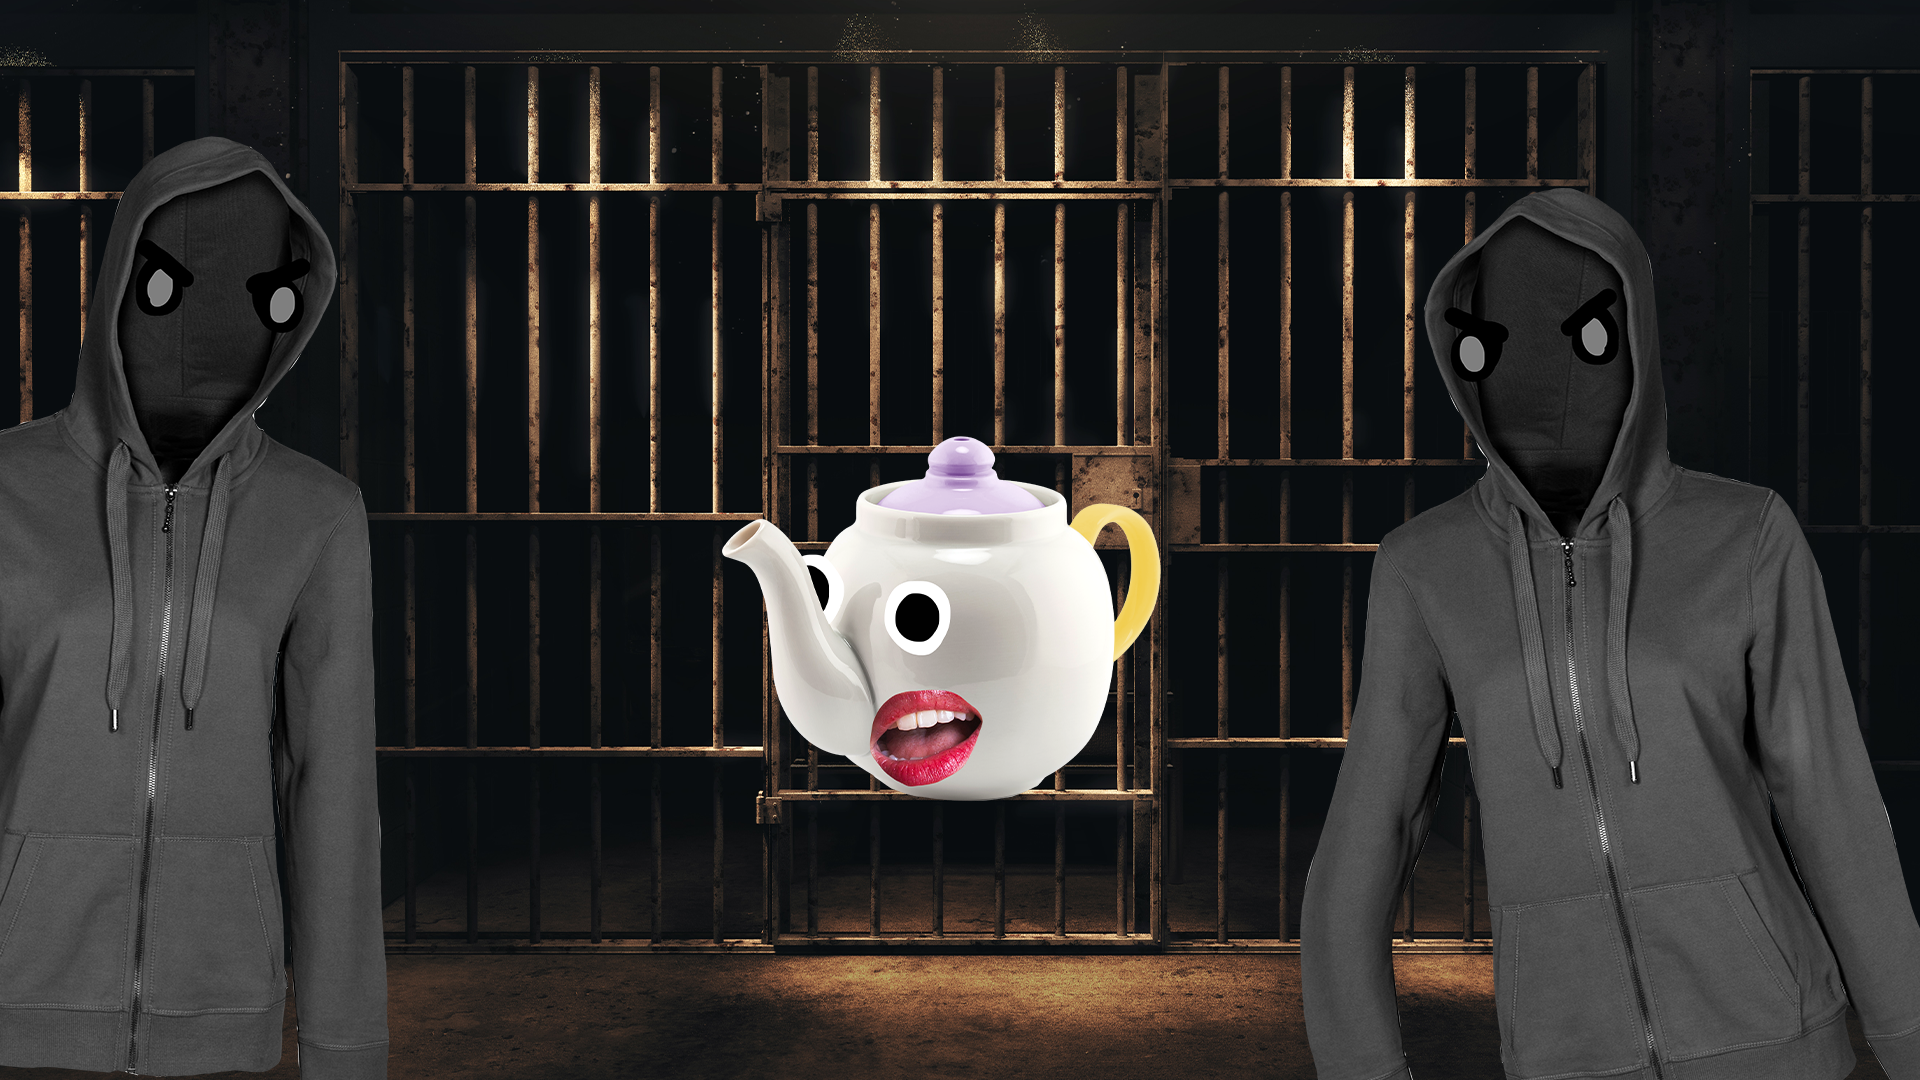 Beano dementors with Beano teapot on prison background